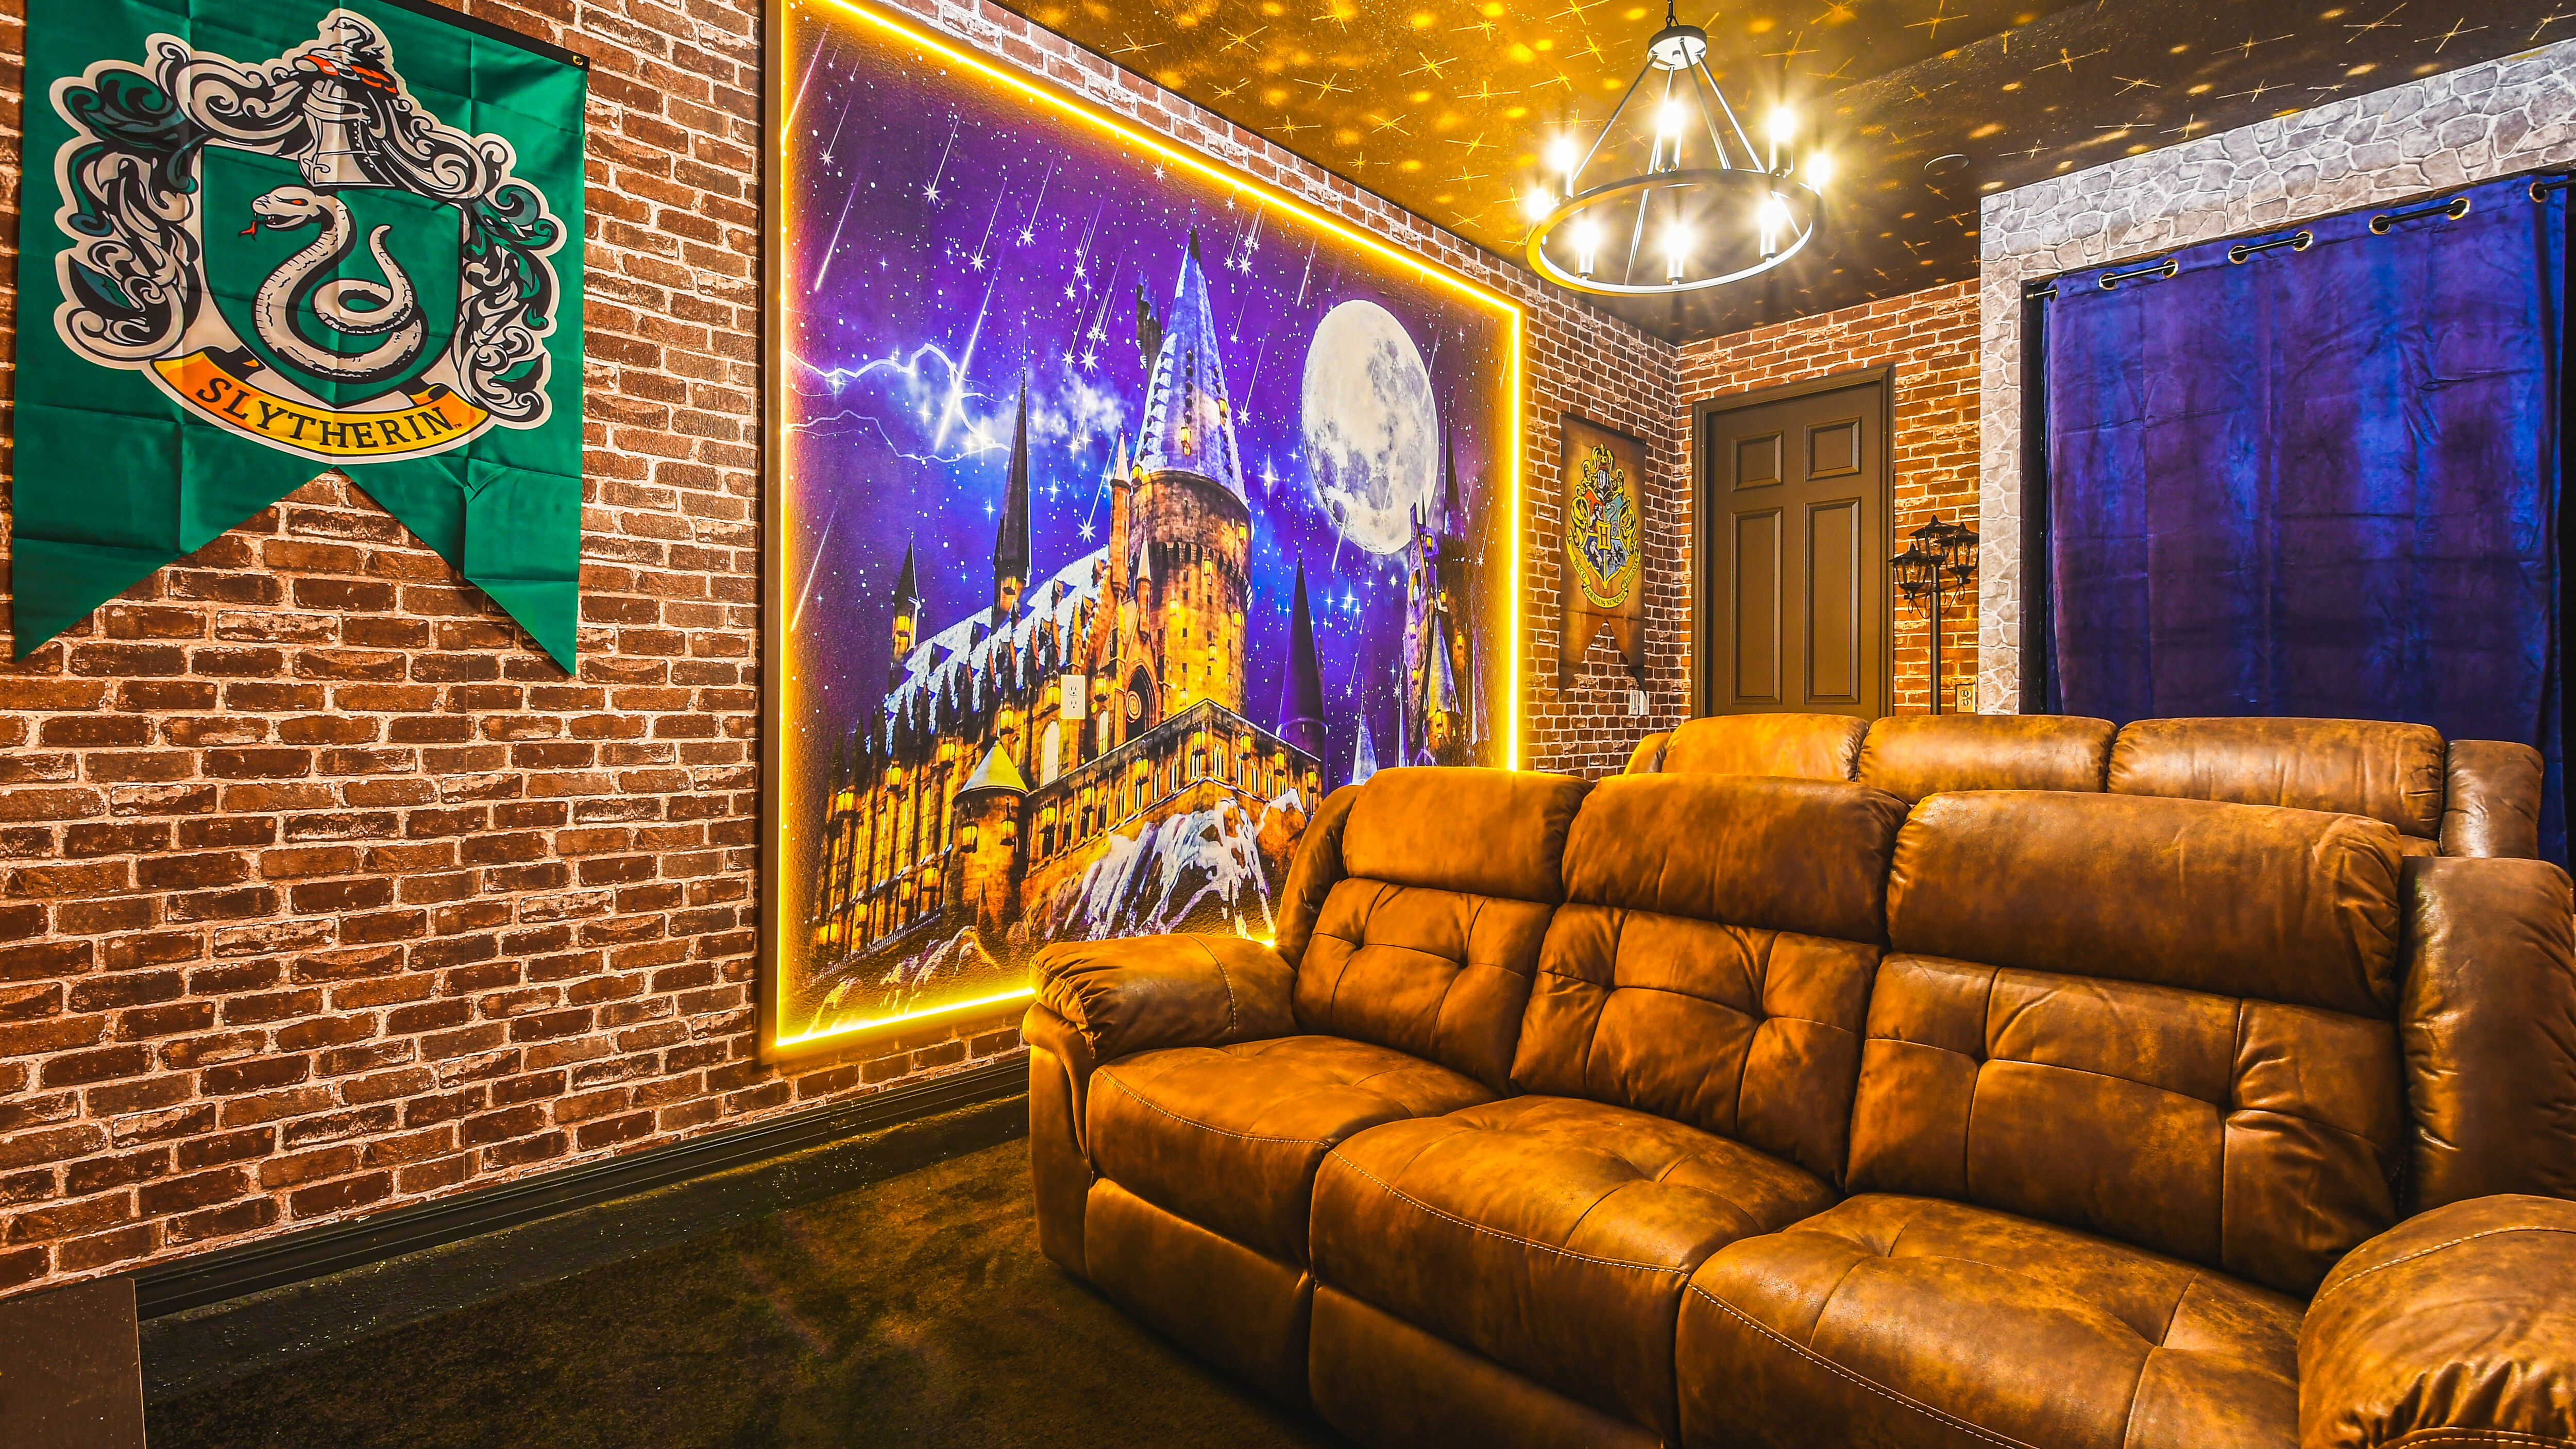 Watch a movie or two with your family in the comfortable theater room